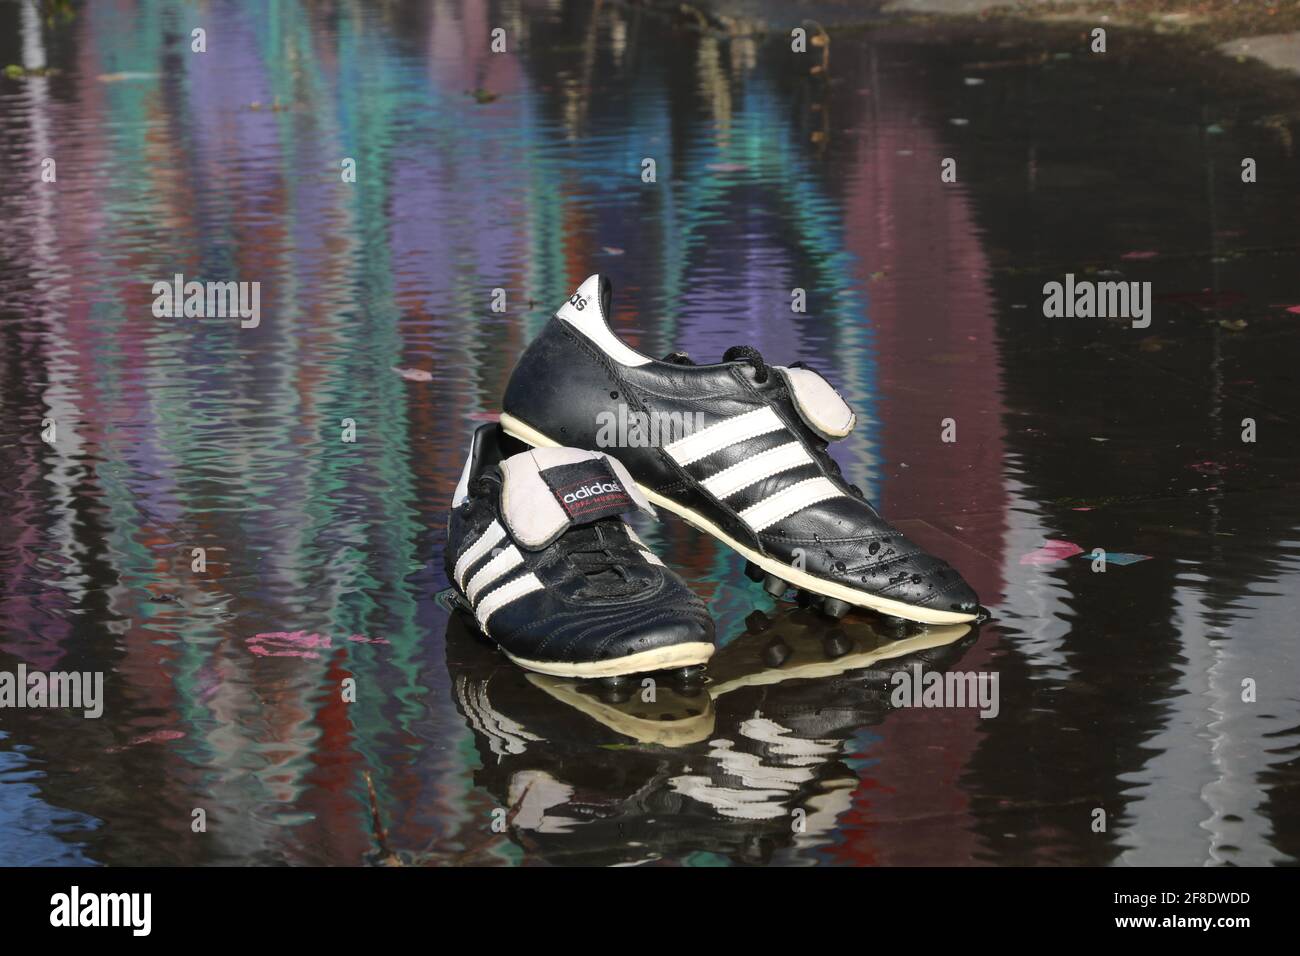 Adidas Copa Mundial Moulded Football Boots Stock Photo